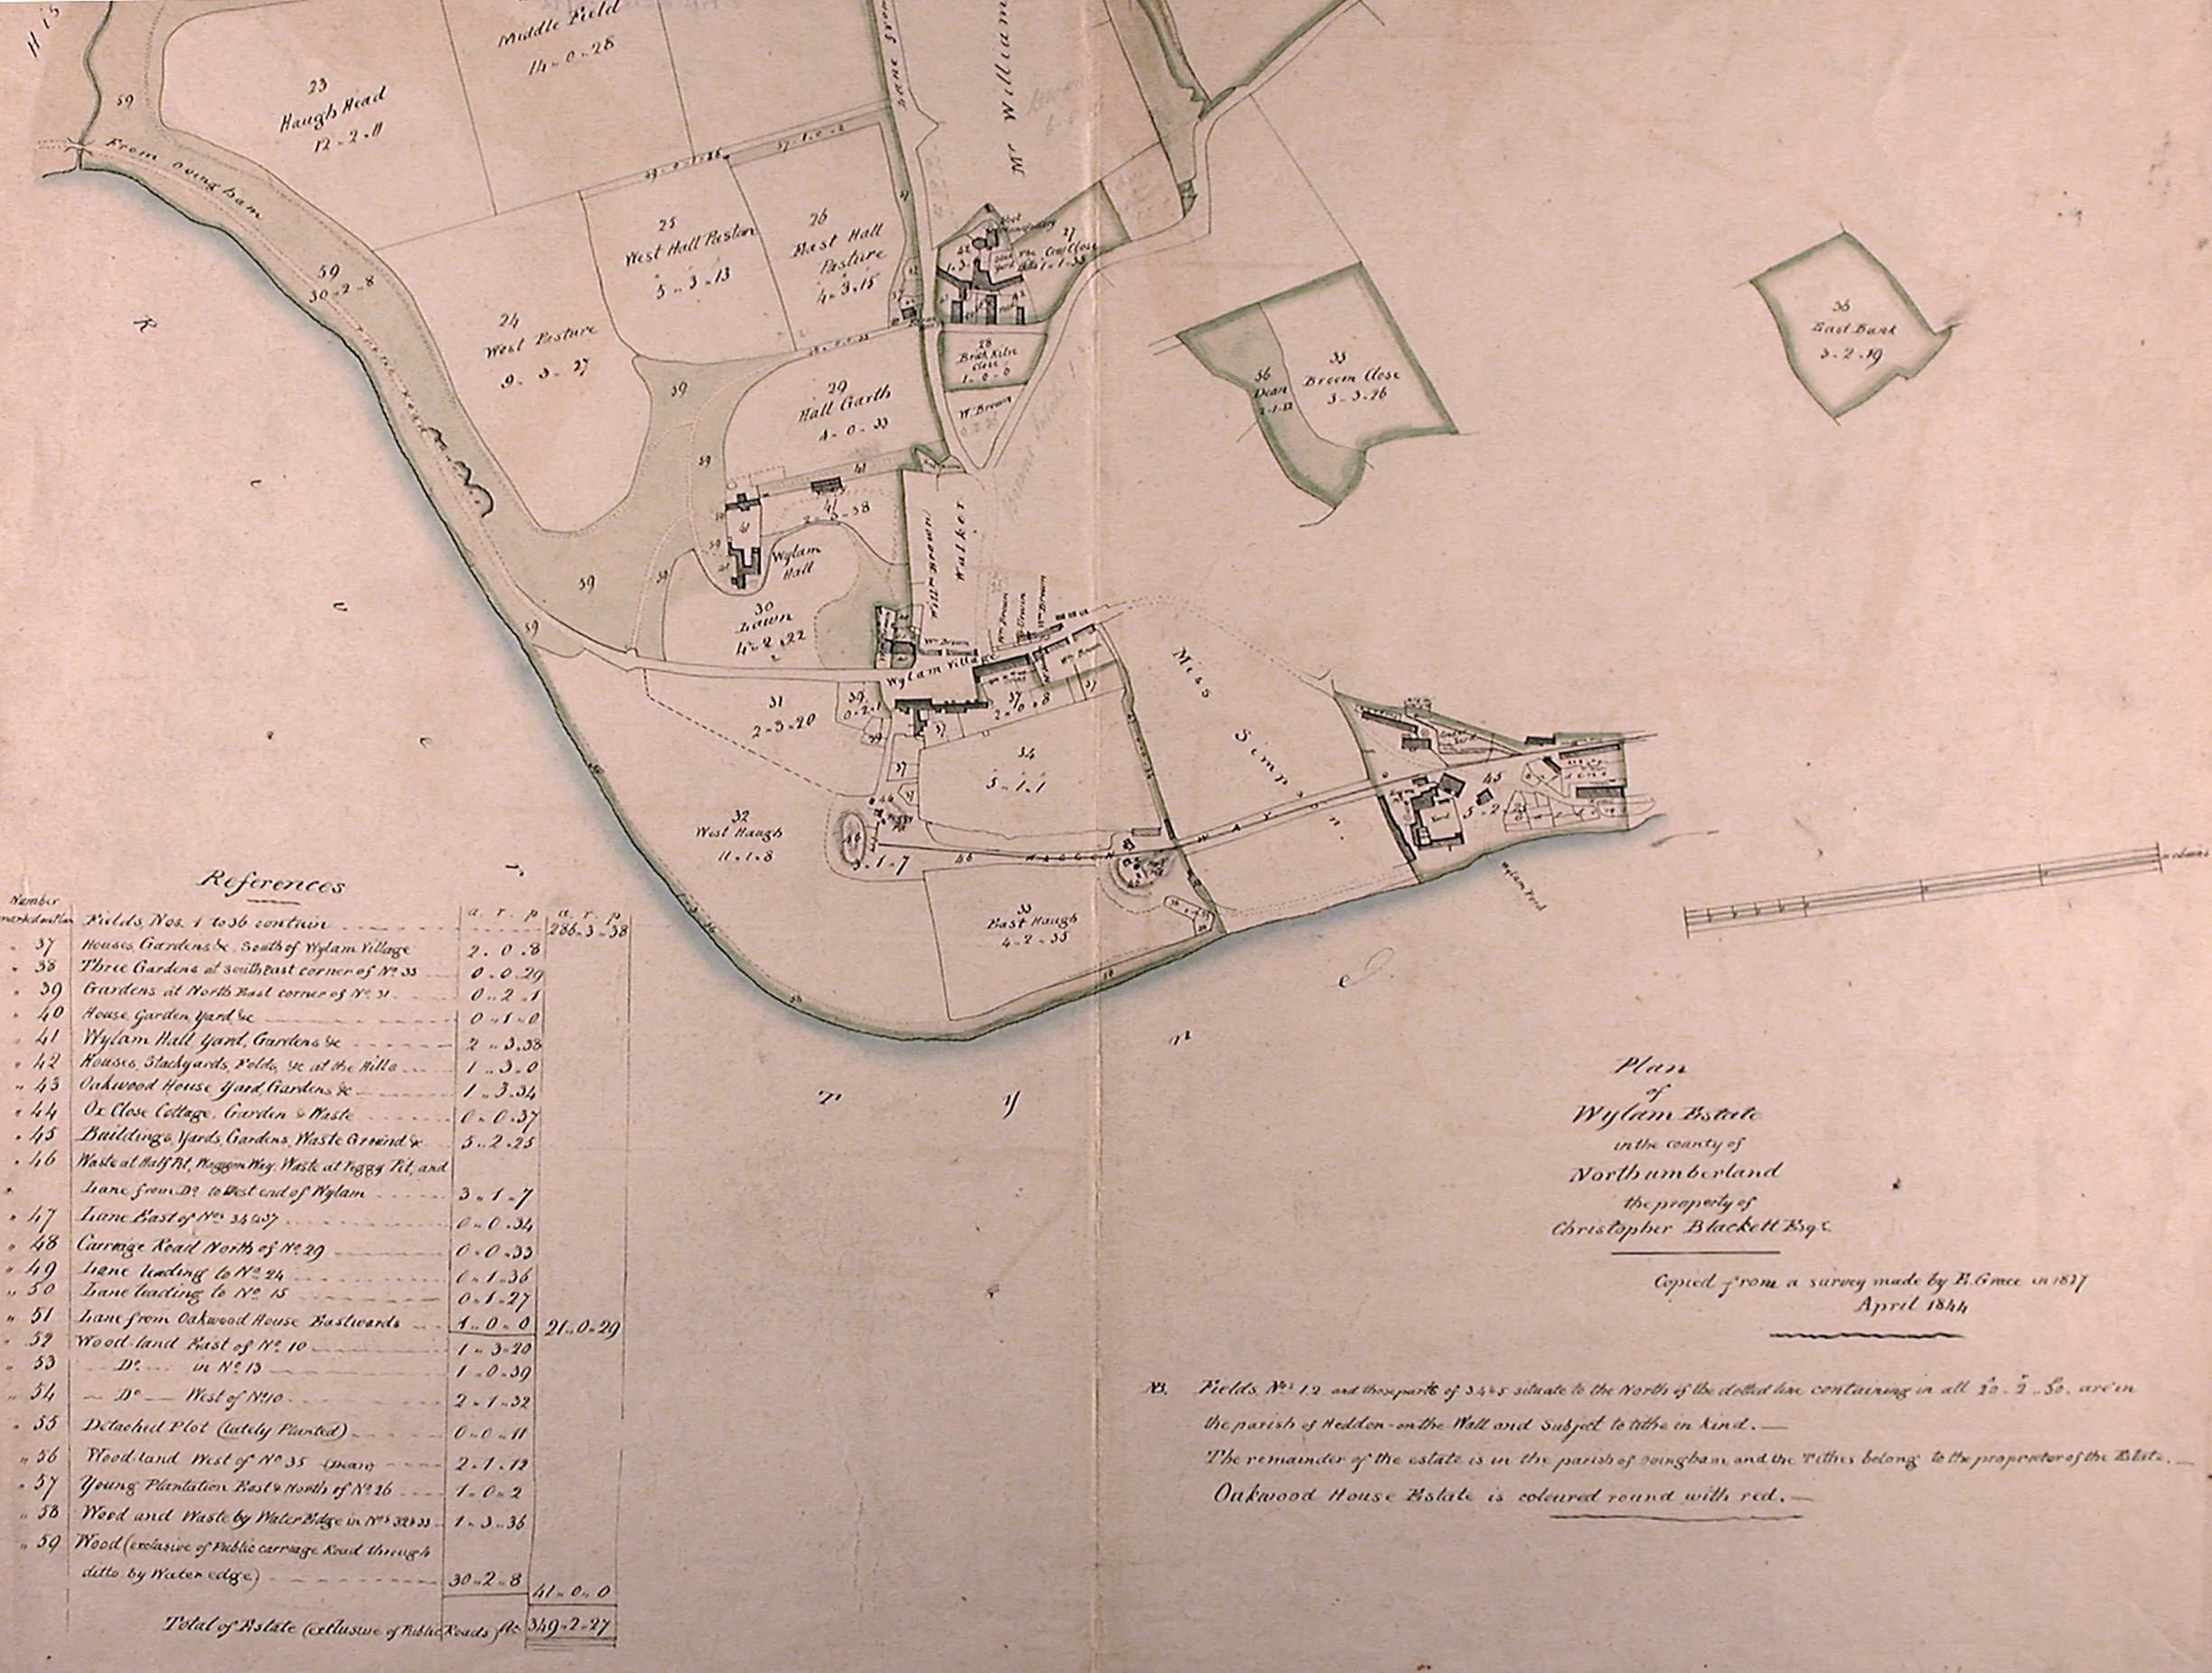 Picture of Plan of Wylam Estate